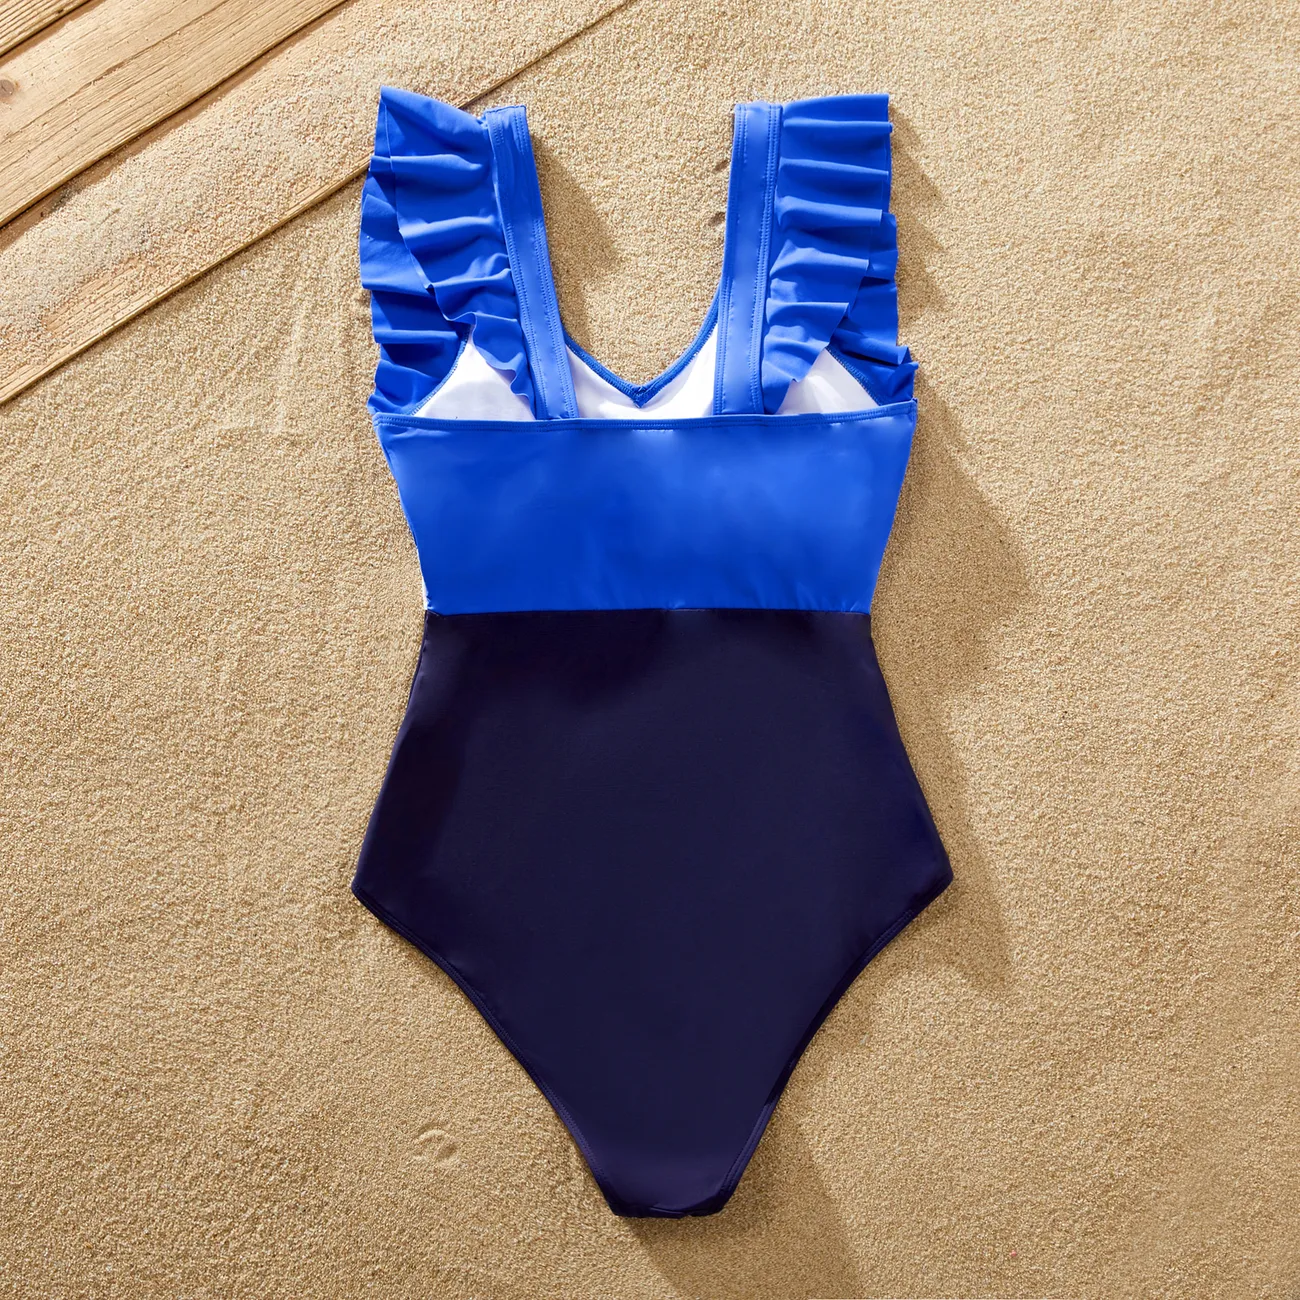 Family Matching Swimsuit Colorblock Drawstring Swim Trunks or Ruffle Trim One-Piece Swimsuit (Sun-Protective) Navy big image 1